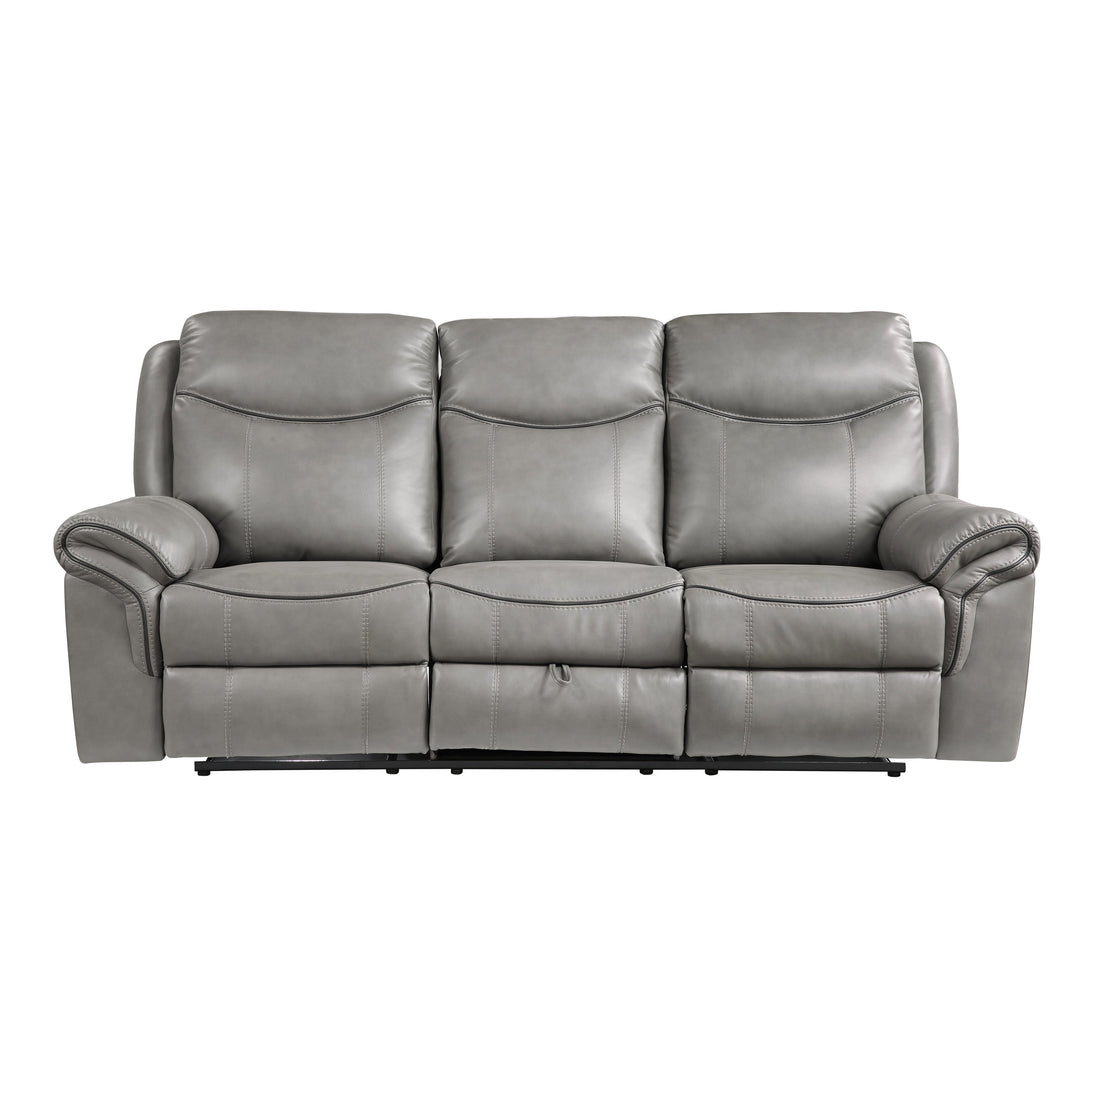 8206GRY-3 Double Reclining Sofa with Center Drop-Down Cup Holders, Receptacles, Hidden Drawer and USB Ports - 8206GRY-3 - Bien Home Furniture &amp; Electronics